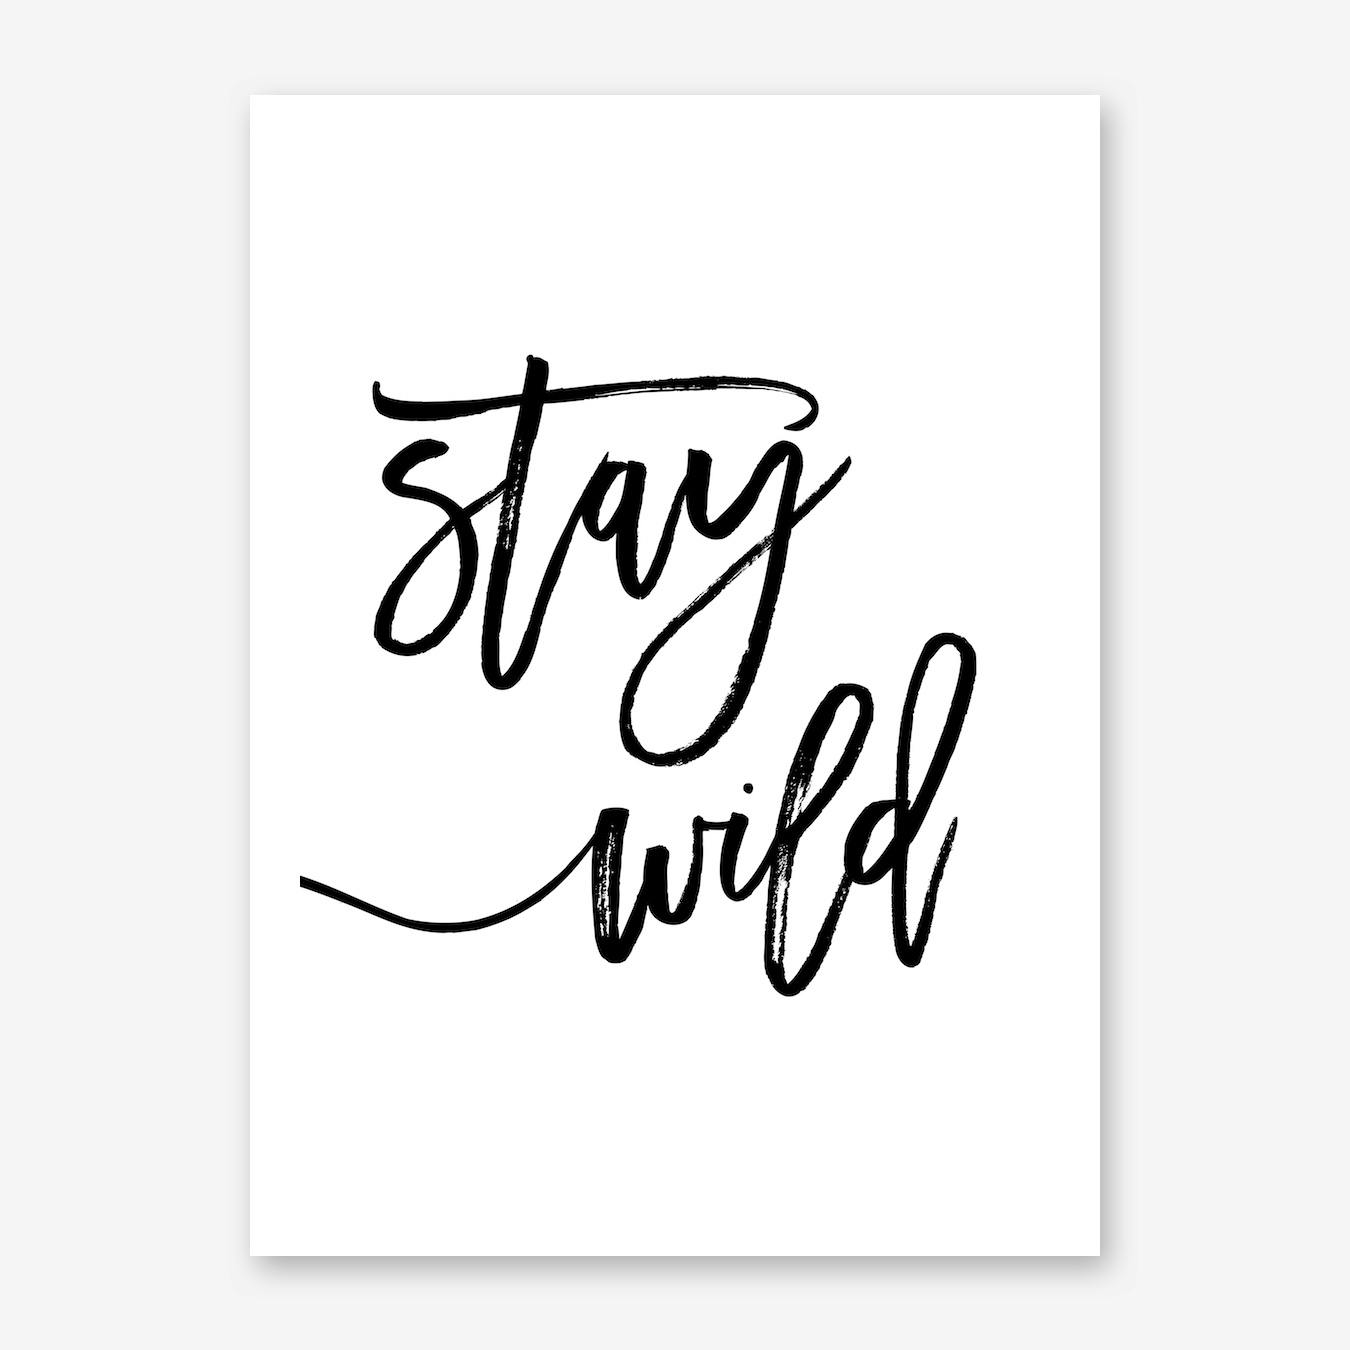 STAY WILD print picture WALL ART quote UNFRAMED TYPOGRAPHY A4 89 